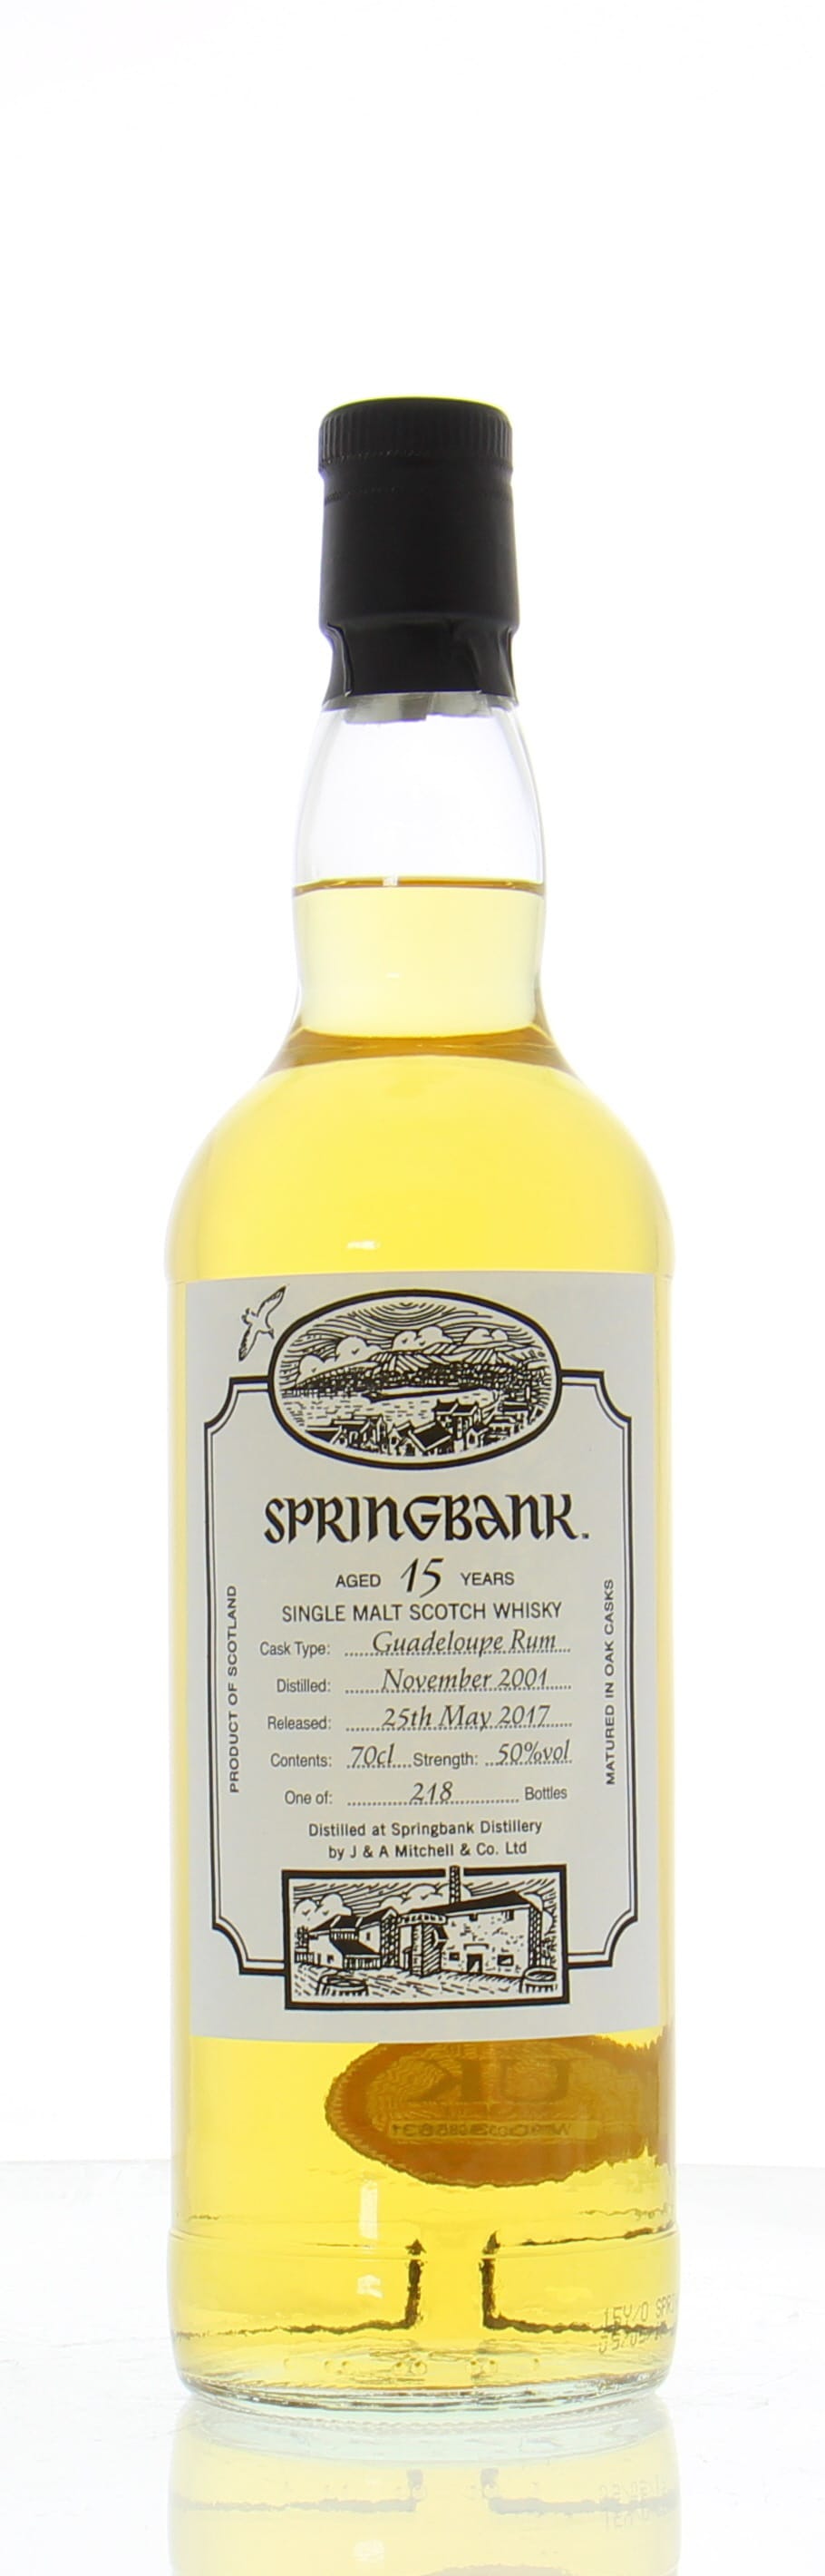 Springbank - 15 years Old Open day 2017 50% 2001 Perfect